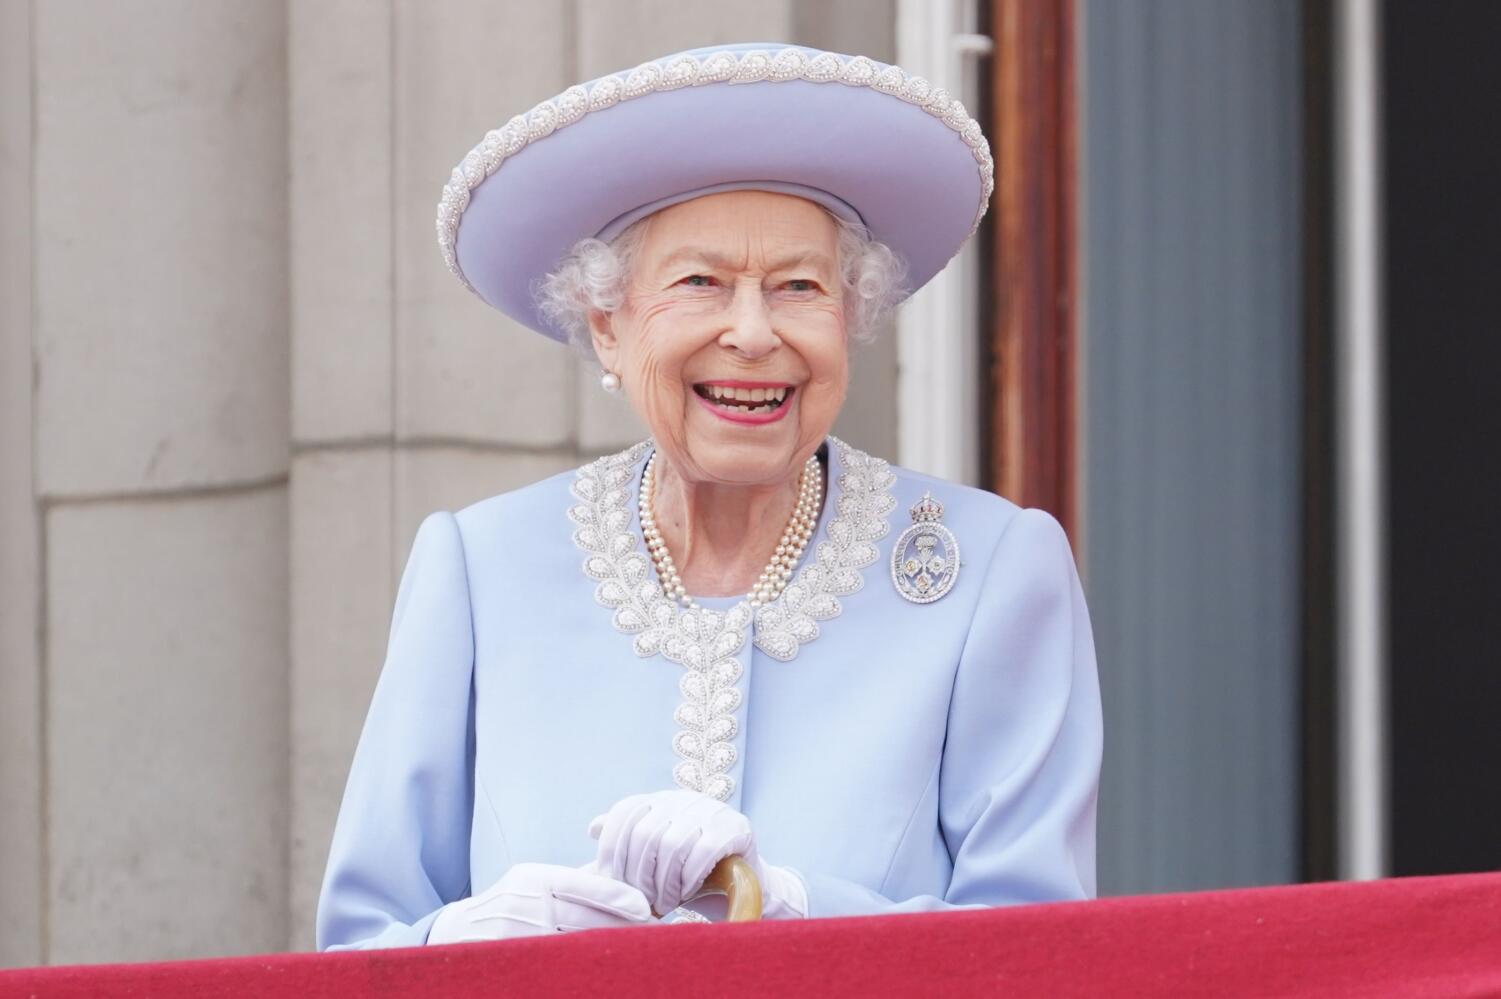 Queen Elizabeth II, who ruled for more than 75 years, left a legacy of public service and steady leadership.

Image from https://www.oprahdaily.com/entertainment/tv-movies/g29772864/queen-elizabeth-ii-age-photos/